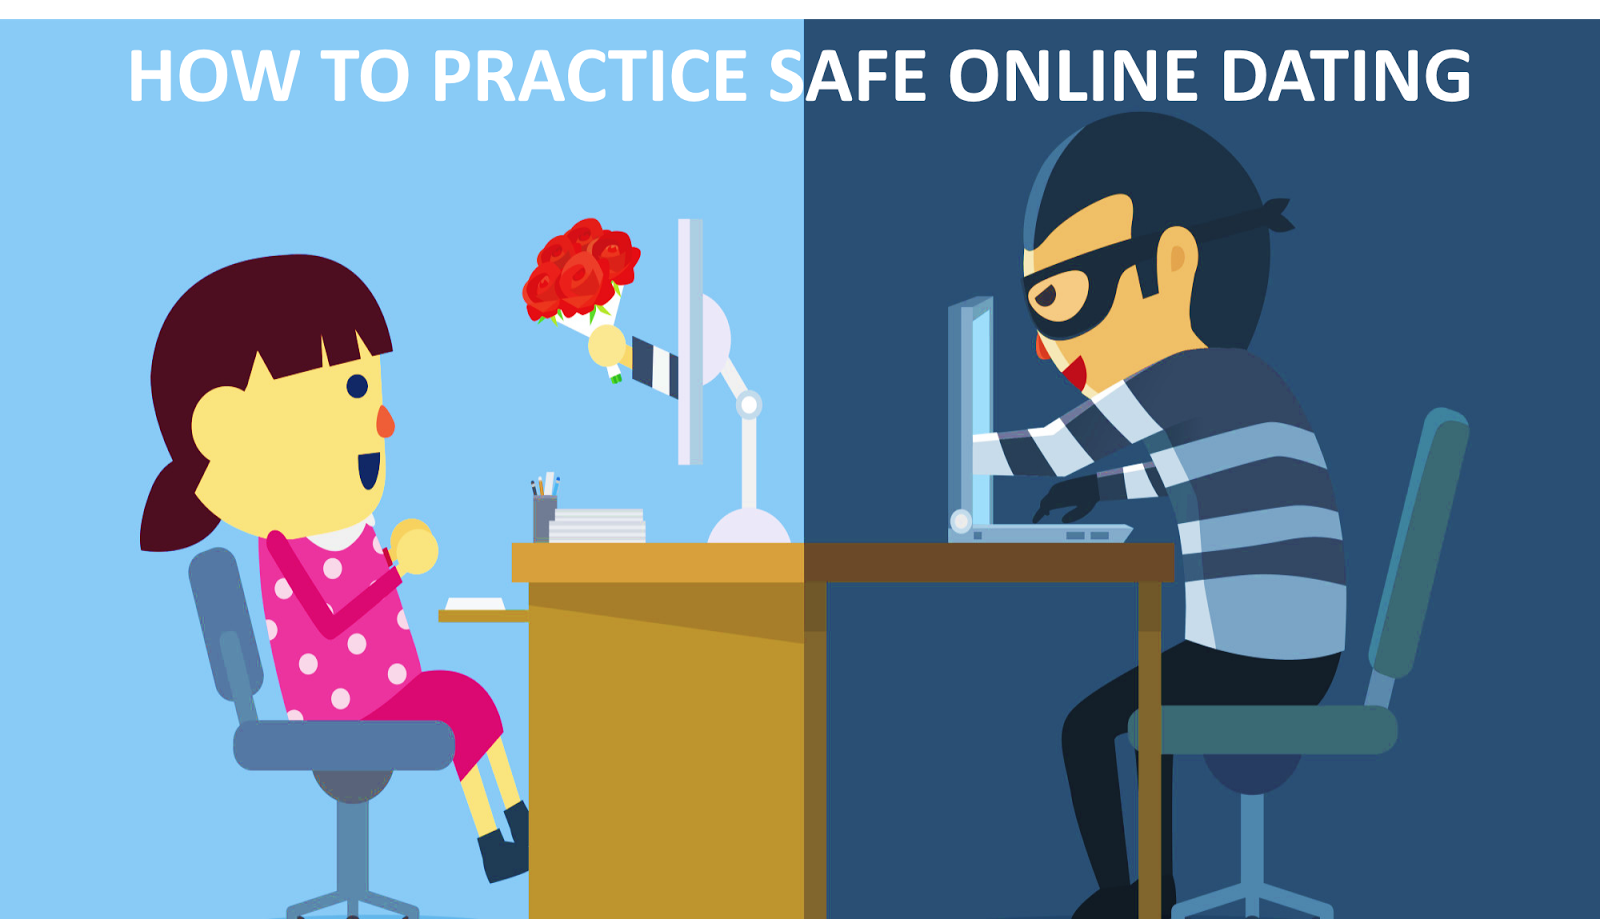 A picture of a Safe online dating practices